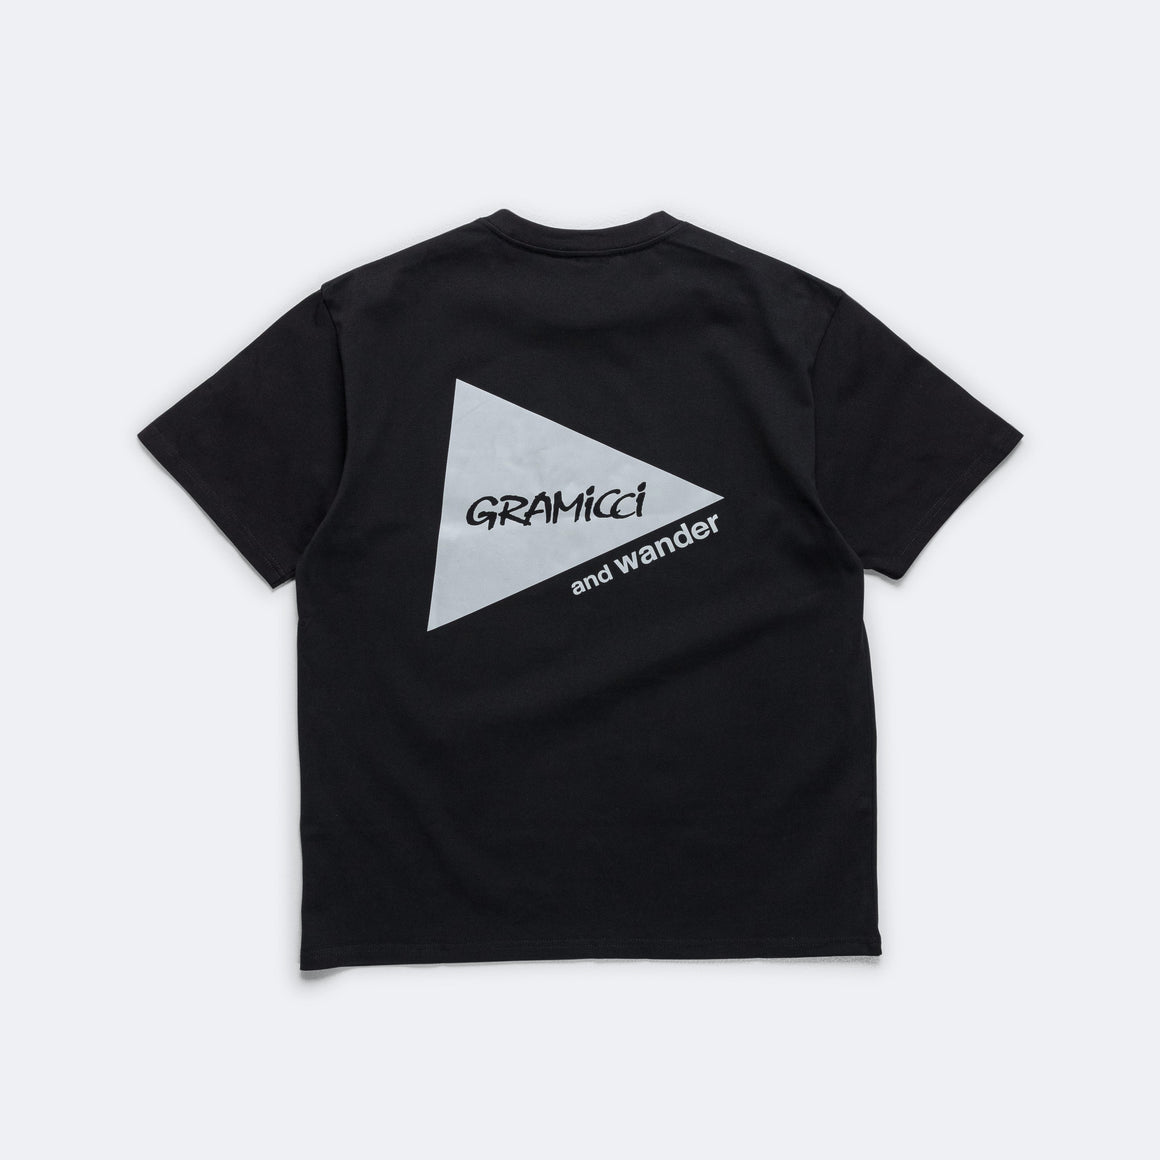 Gramicci - Backprint Tee × and wander - Black - UP THERE